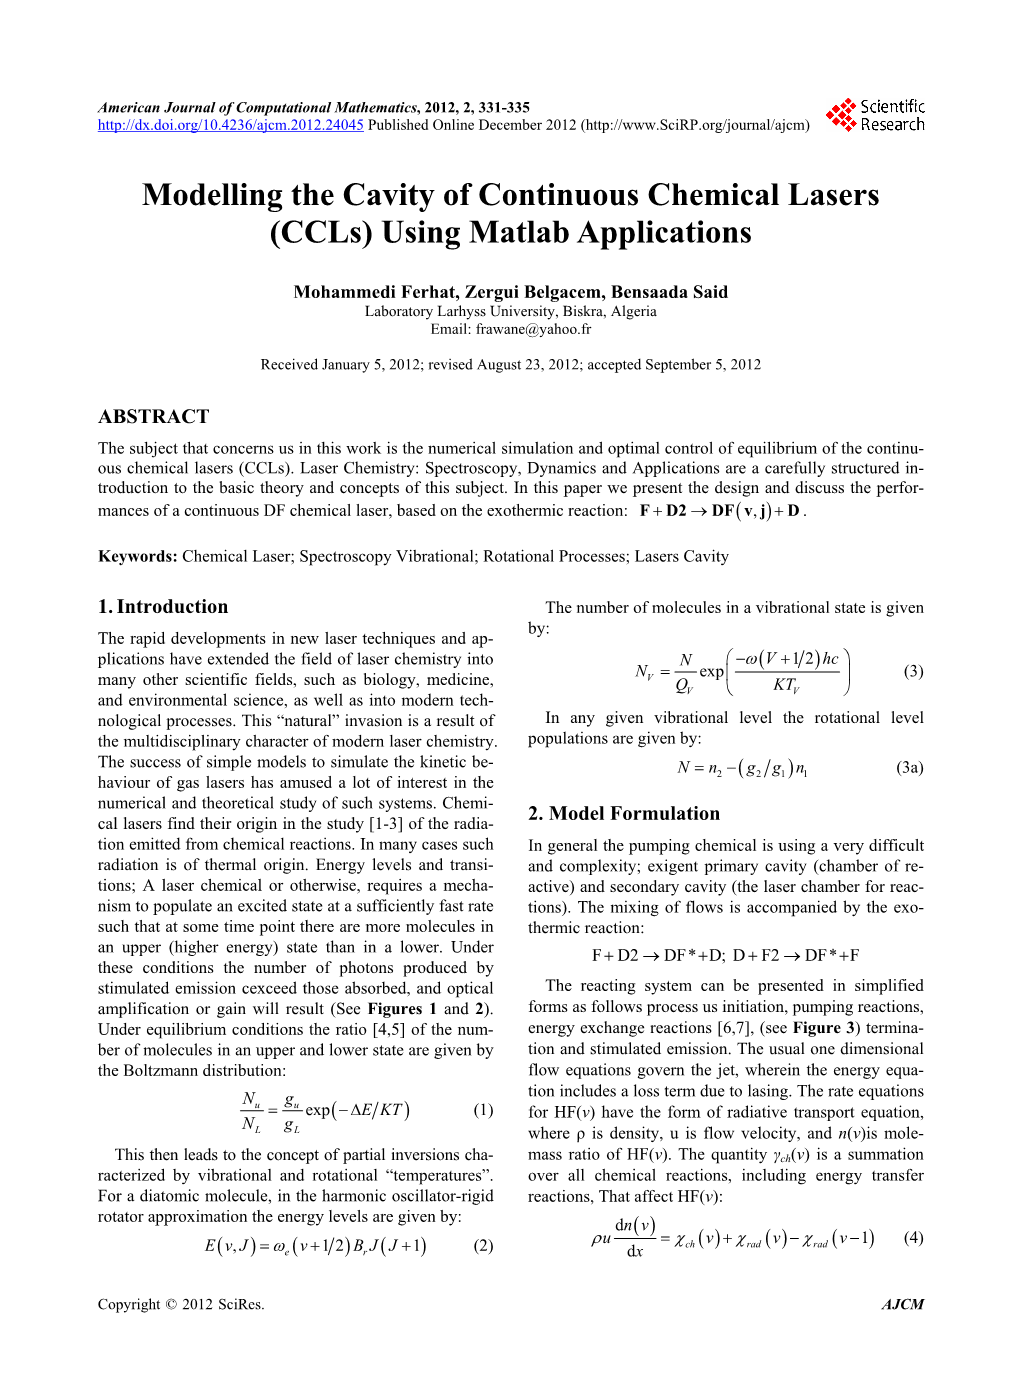 Modelling the Cavity of Continuous Chemical Lasers (Ccls) Using Matlab Applications